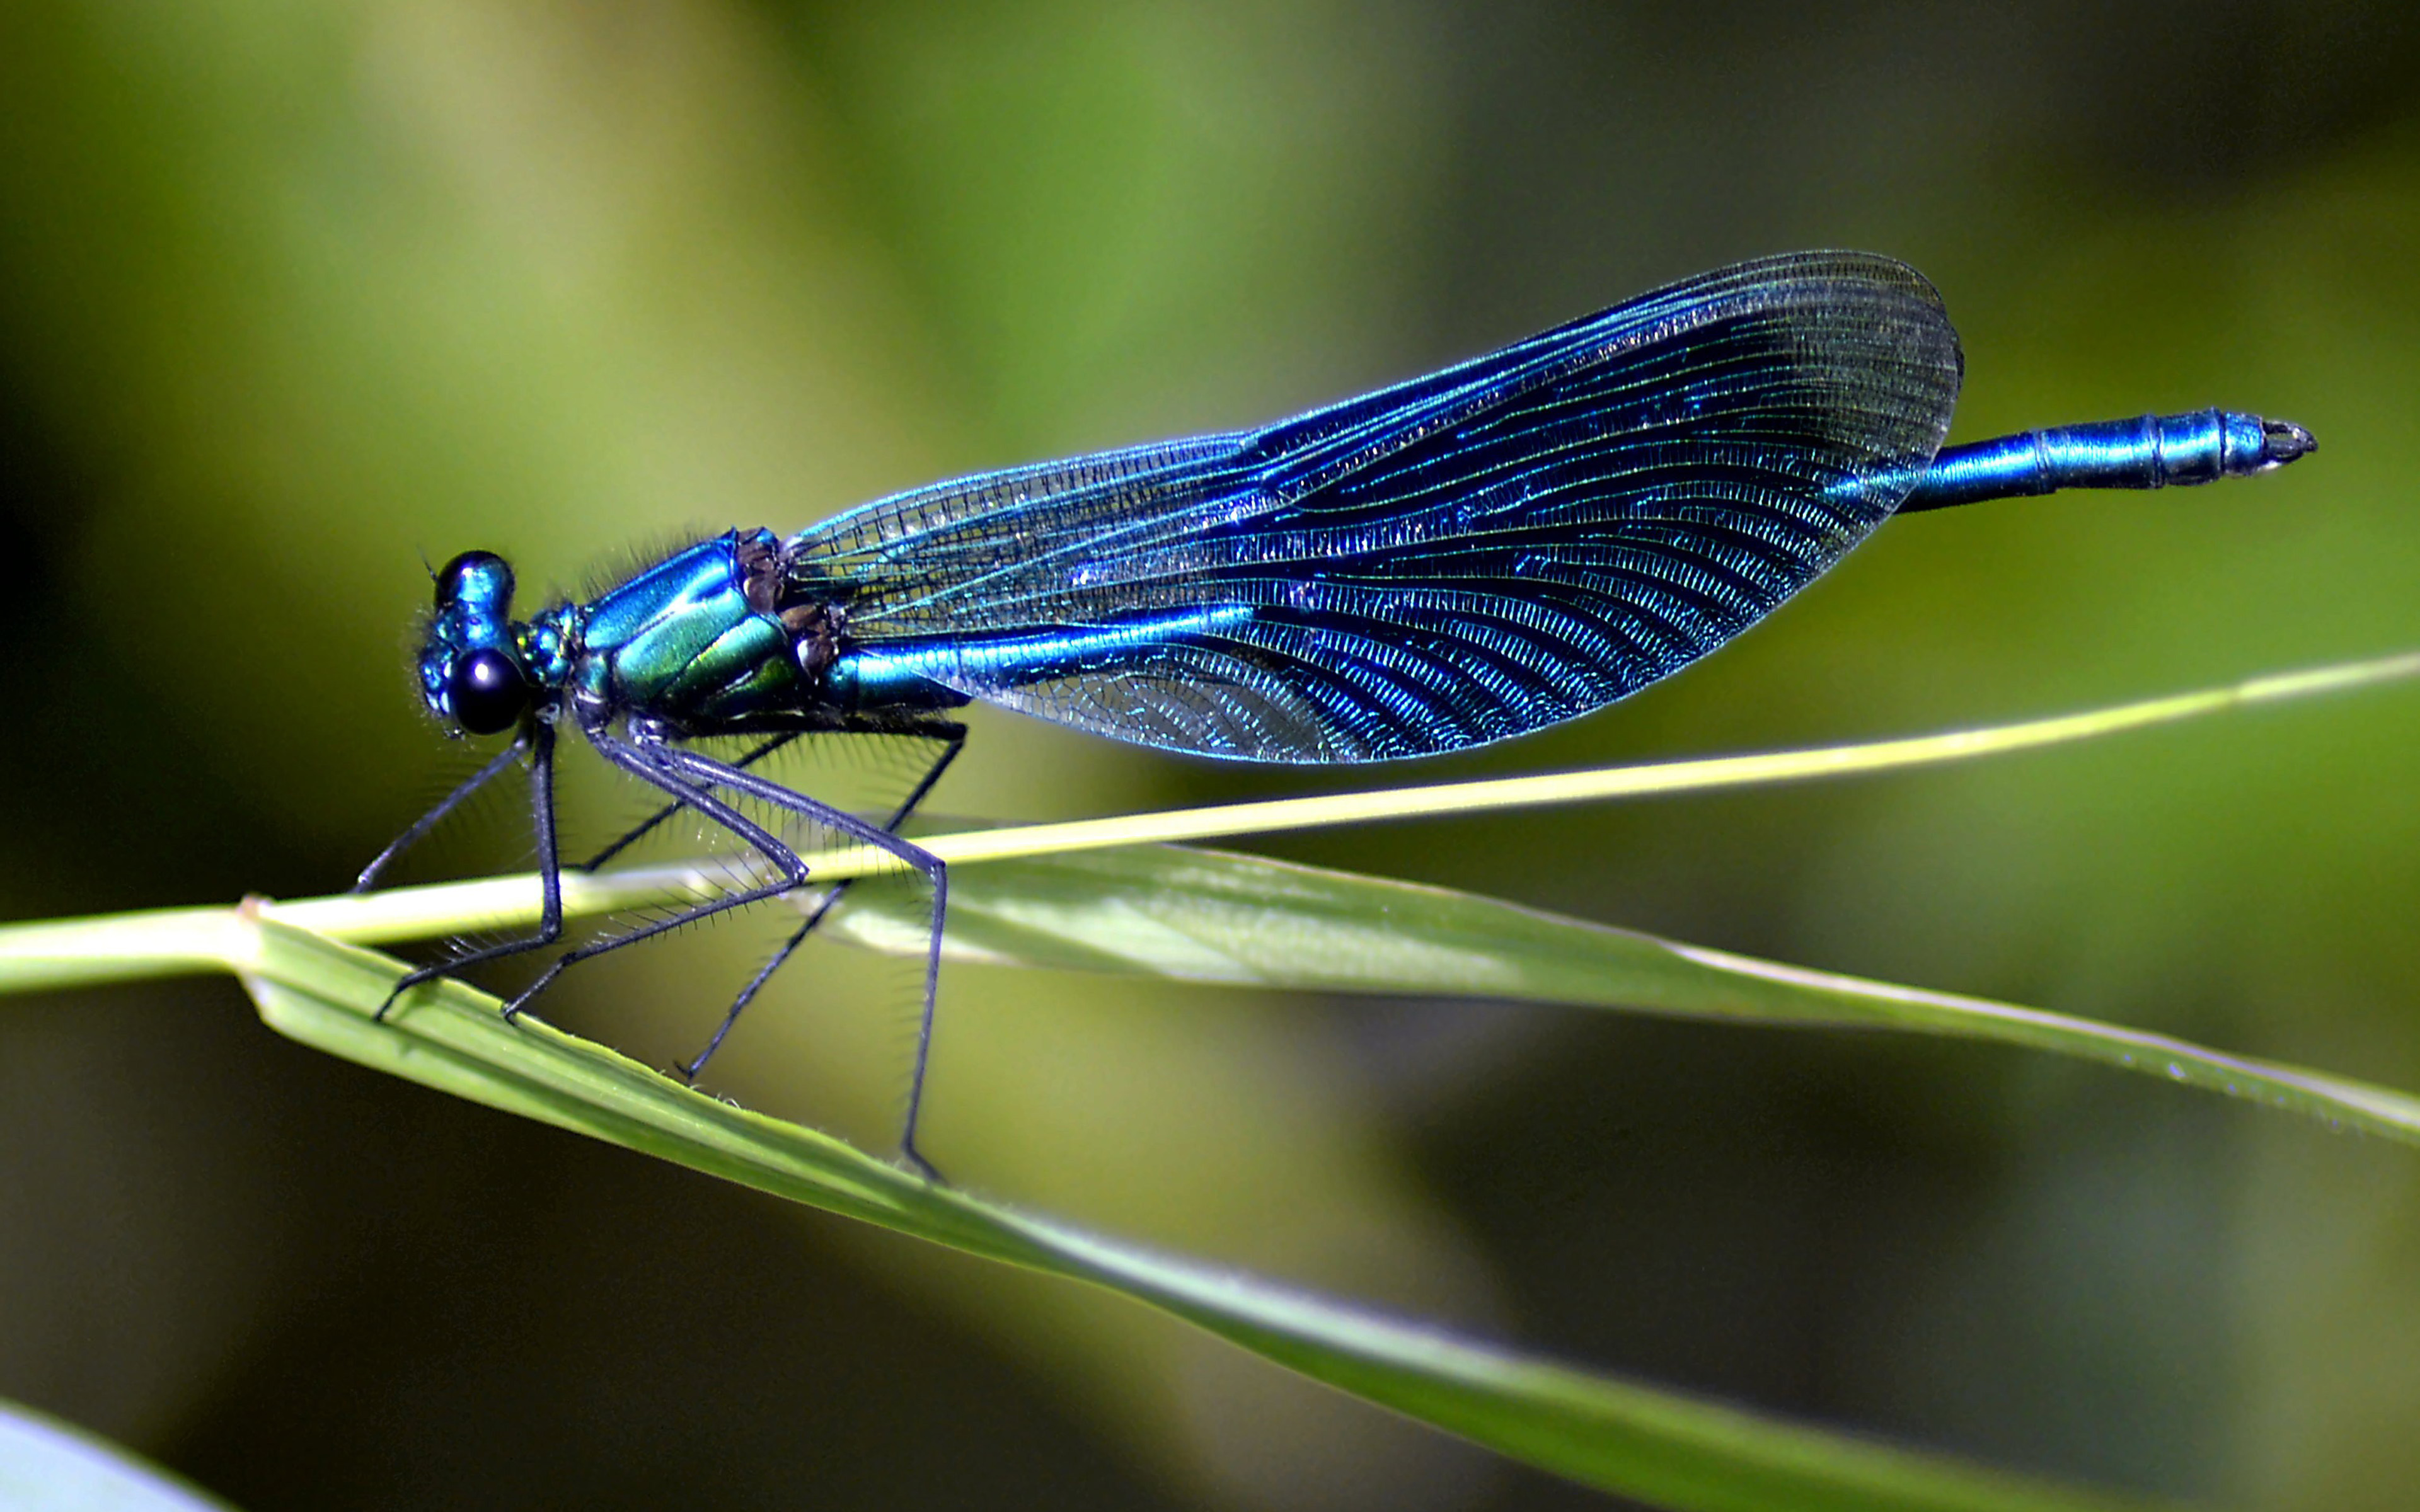 Blue Dragonfly Insect From Nature Desktop Hd Wallpaper For Mobile ...